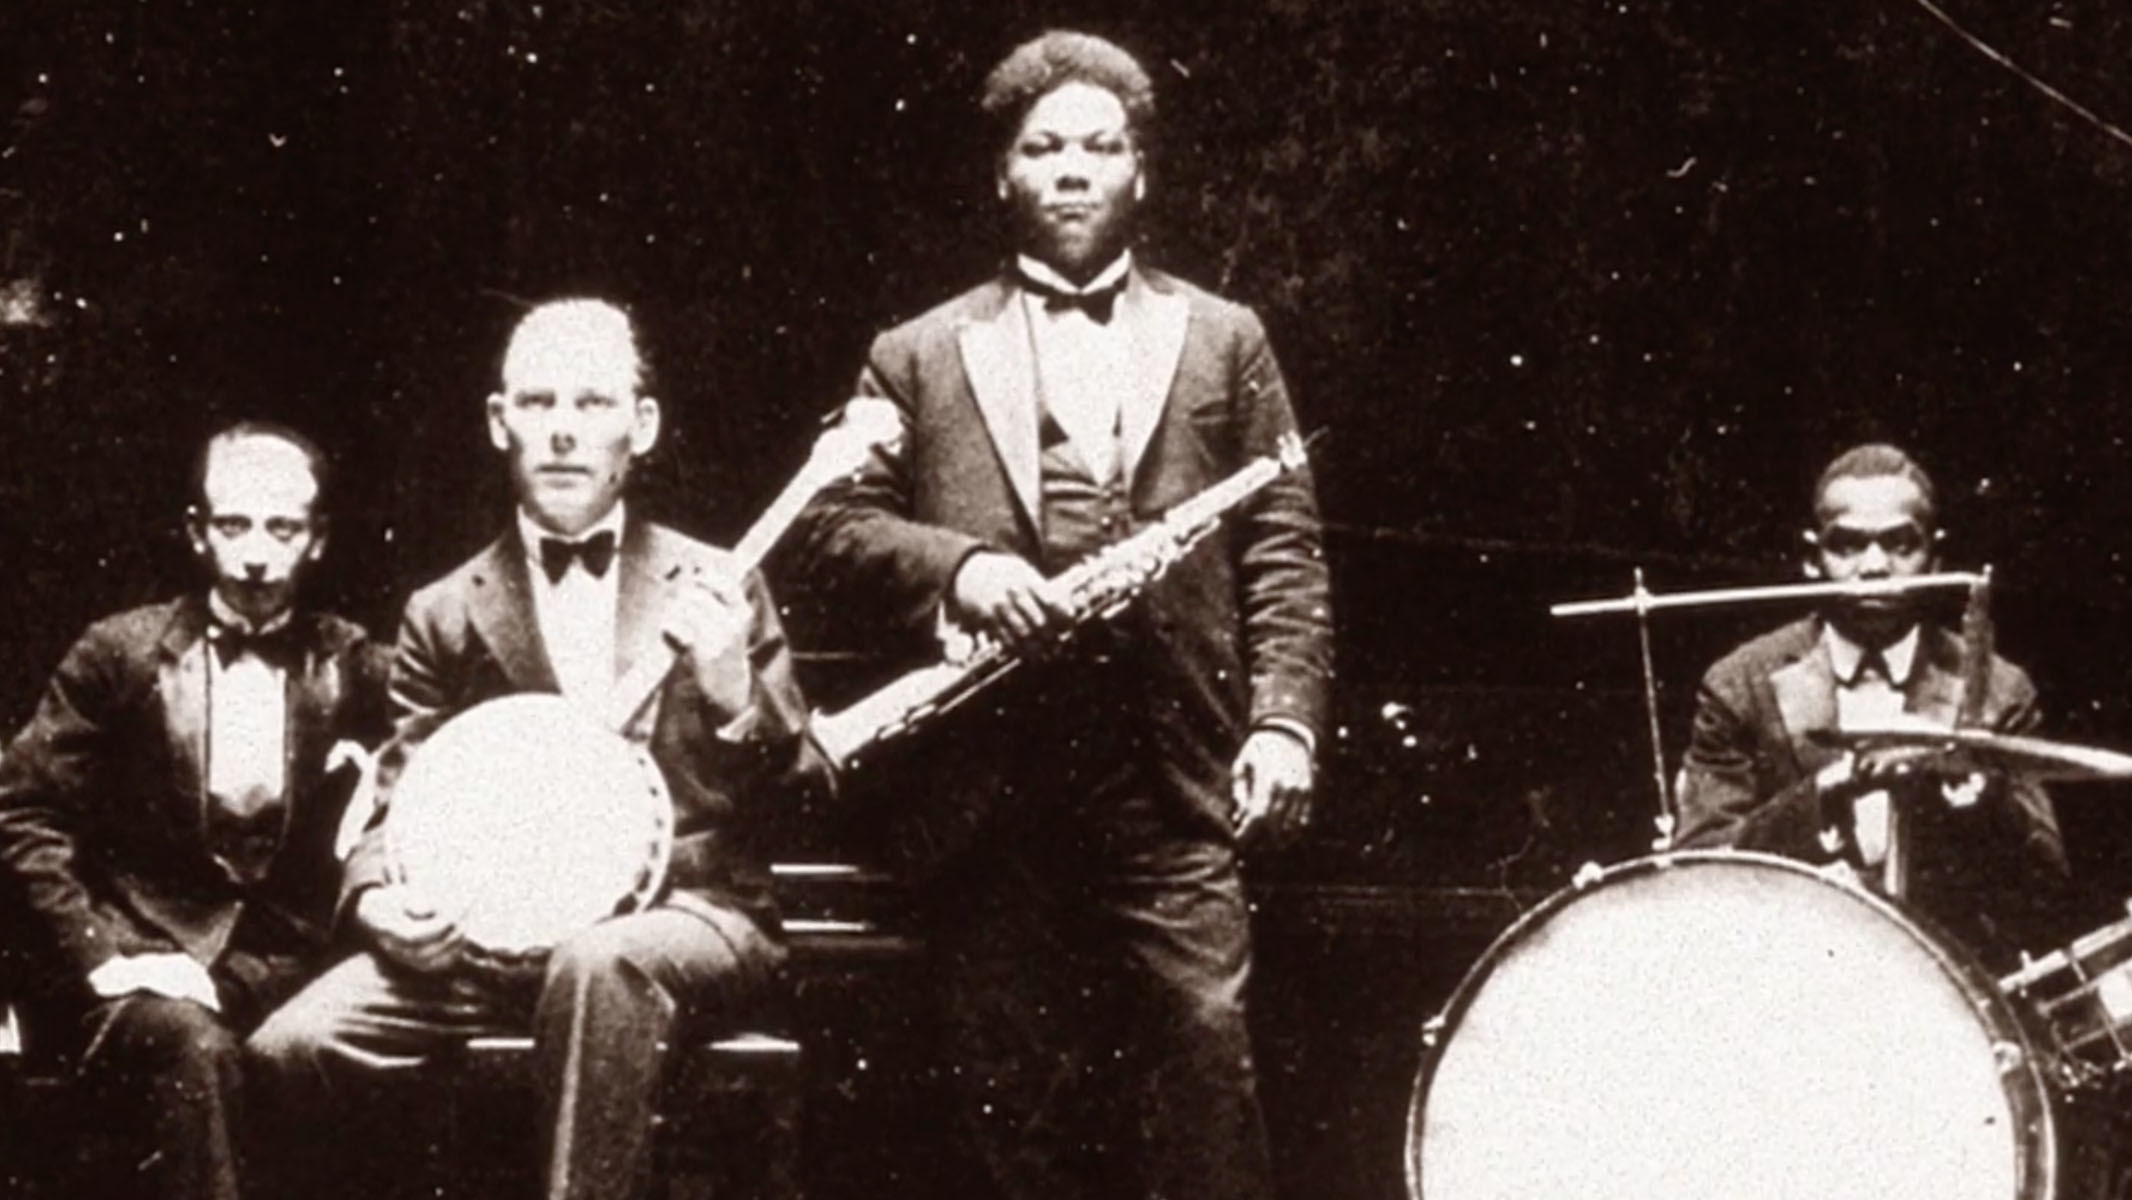 A black-and-white image of 4 men posing for a photograph, holding musical instruments.